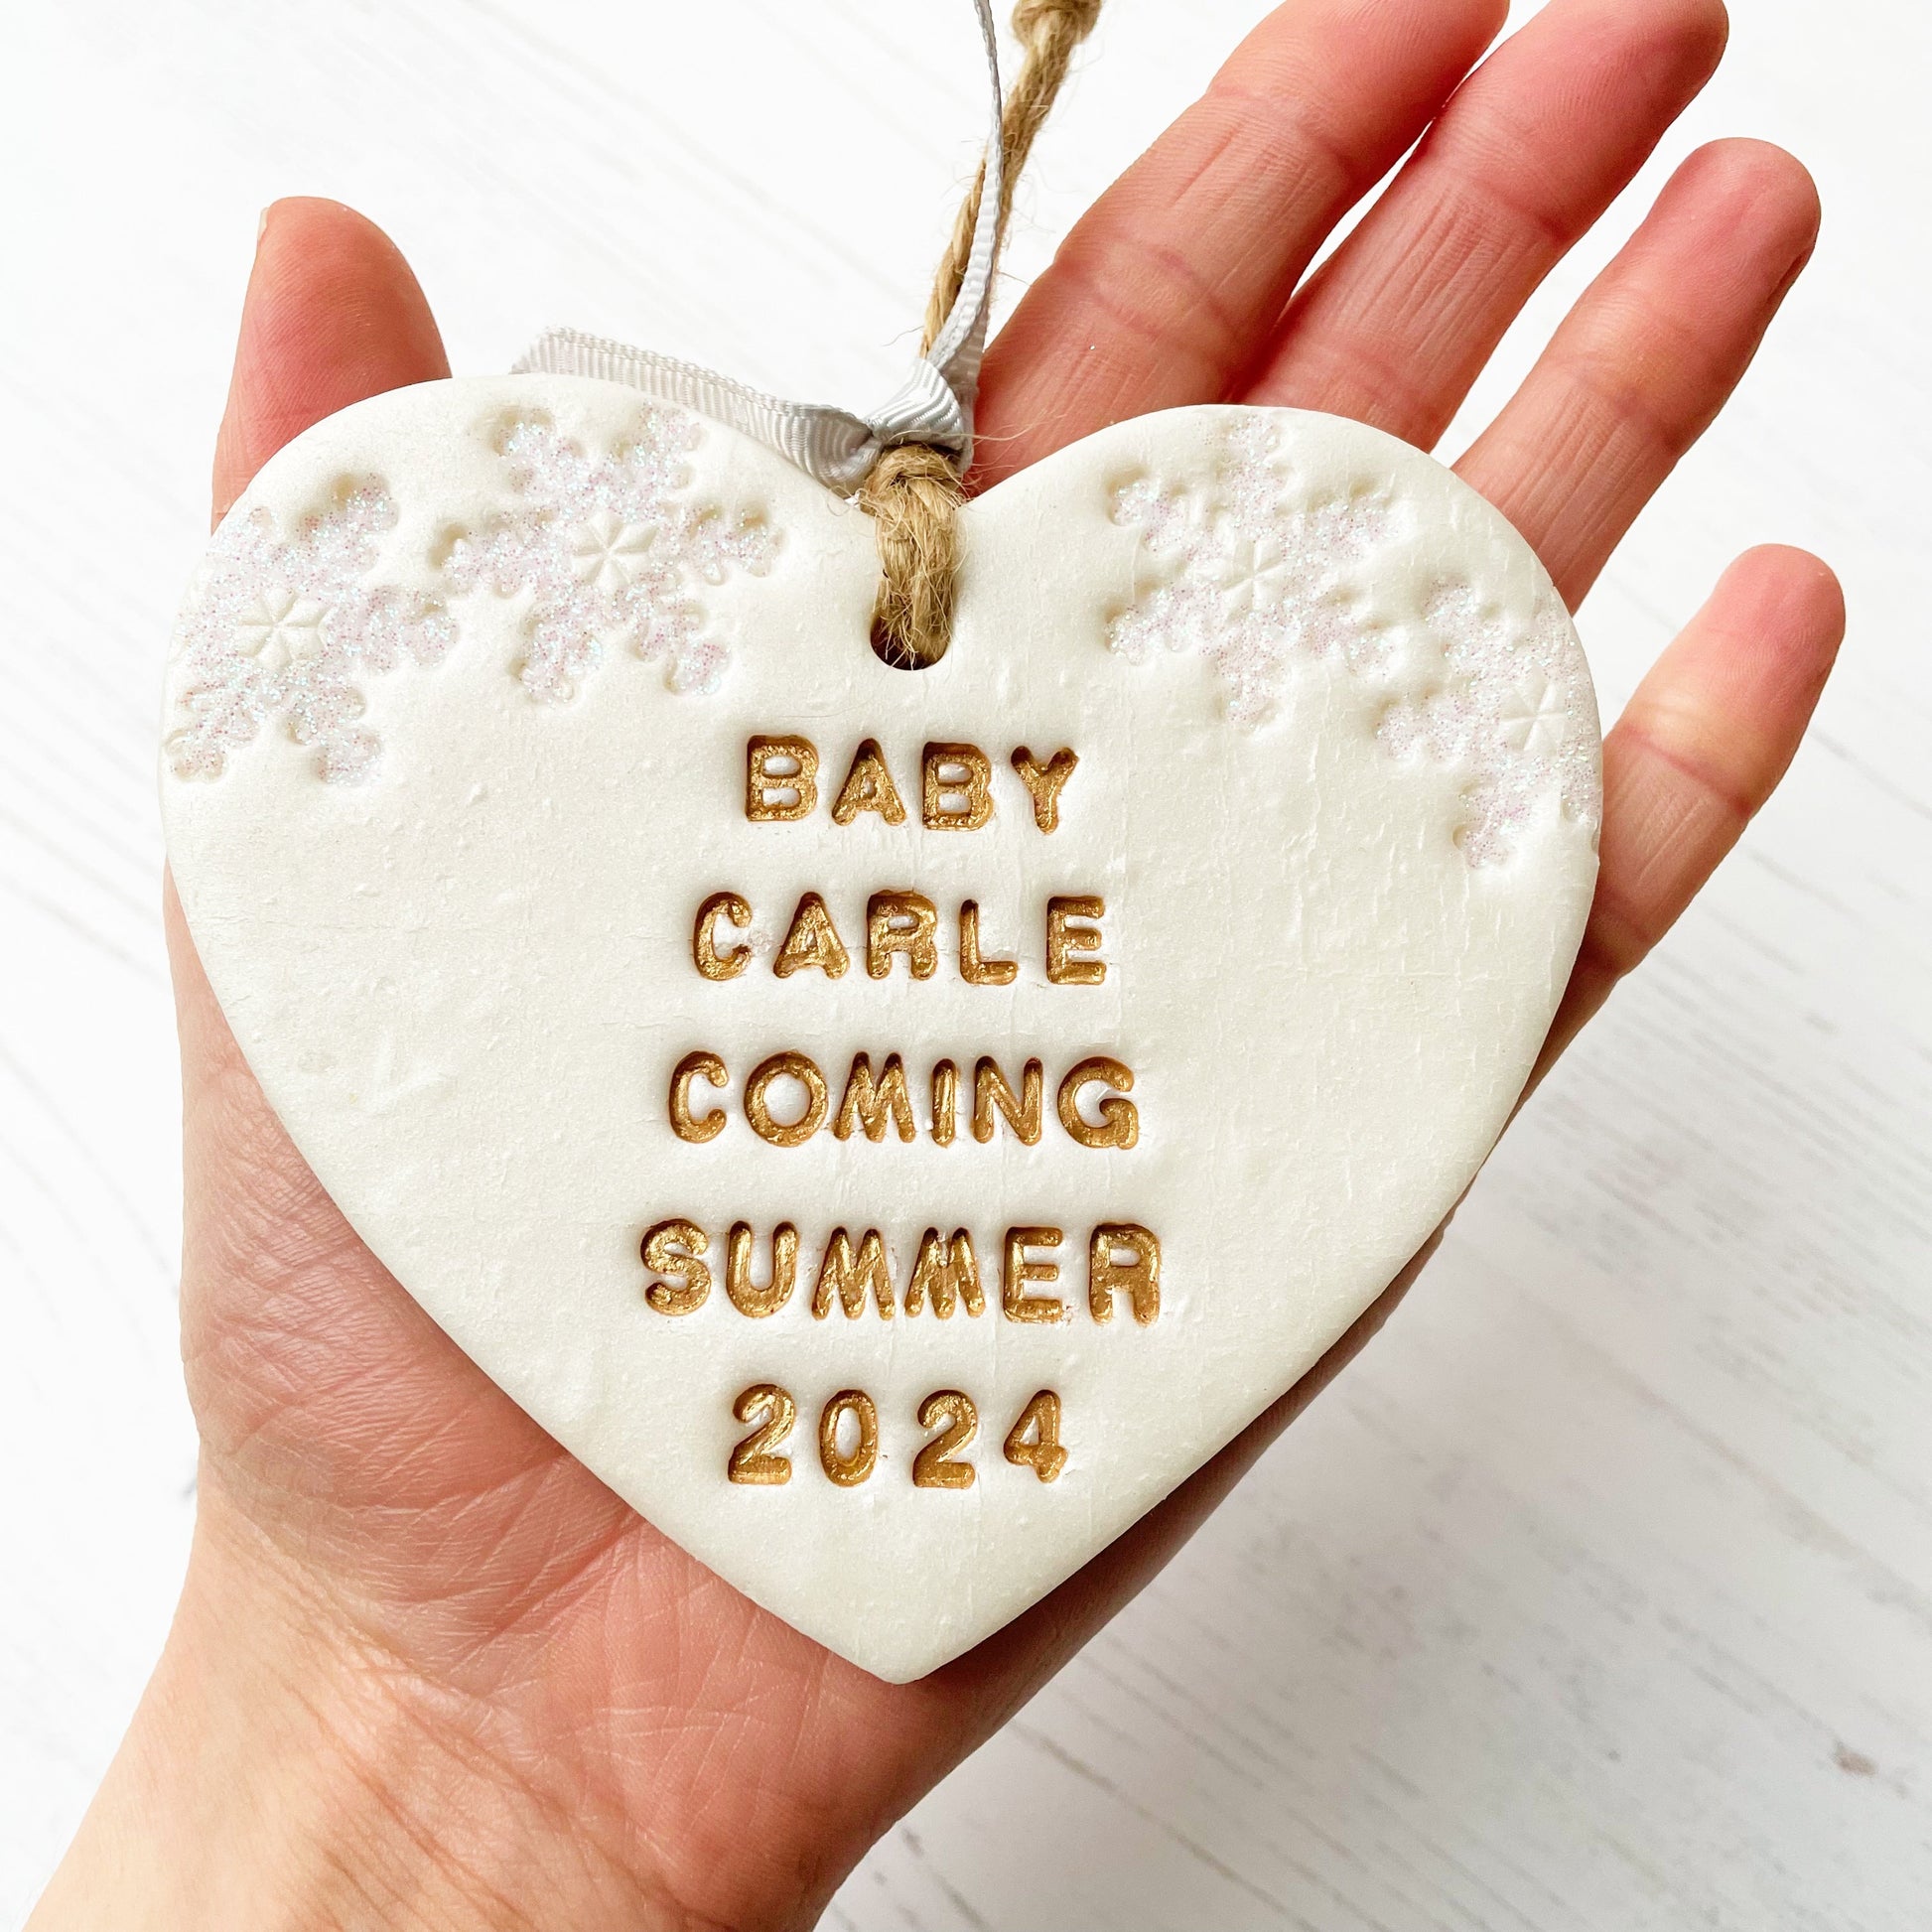 Personalised baby's first Christmas heart ornament, pearlised white clay with BABY CARLE DUE SUMMER 2024 painted gold, decorated with 2 iridescent glitter snowflakes on either side of the top of the heart